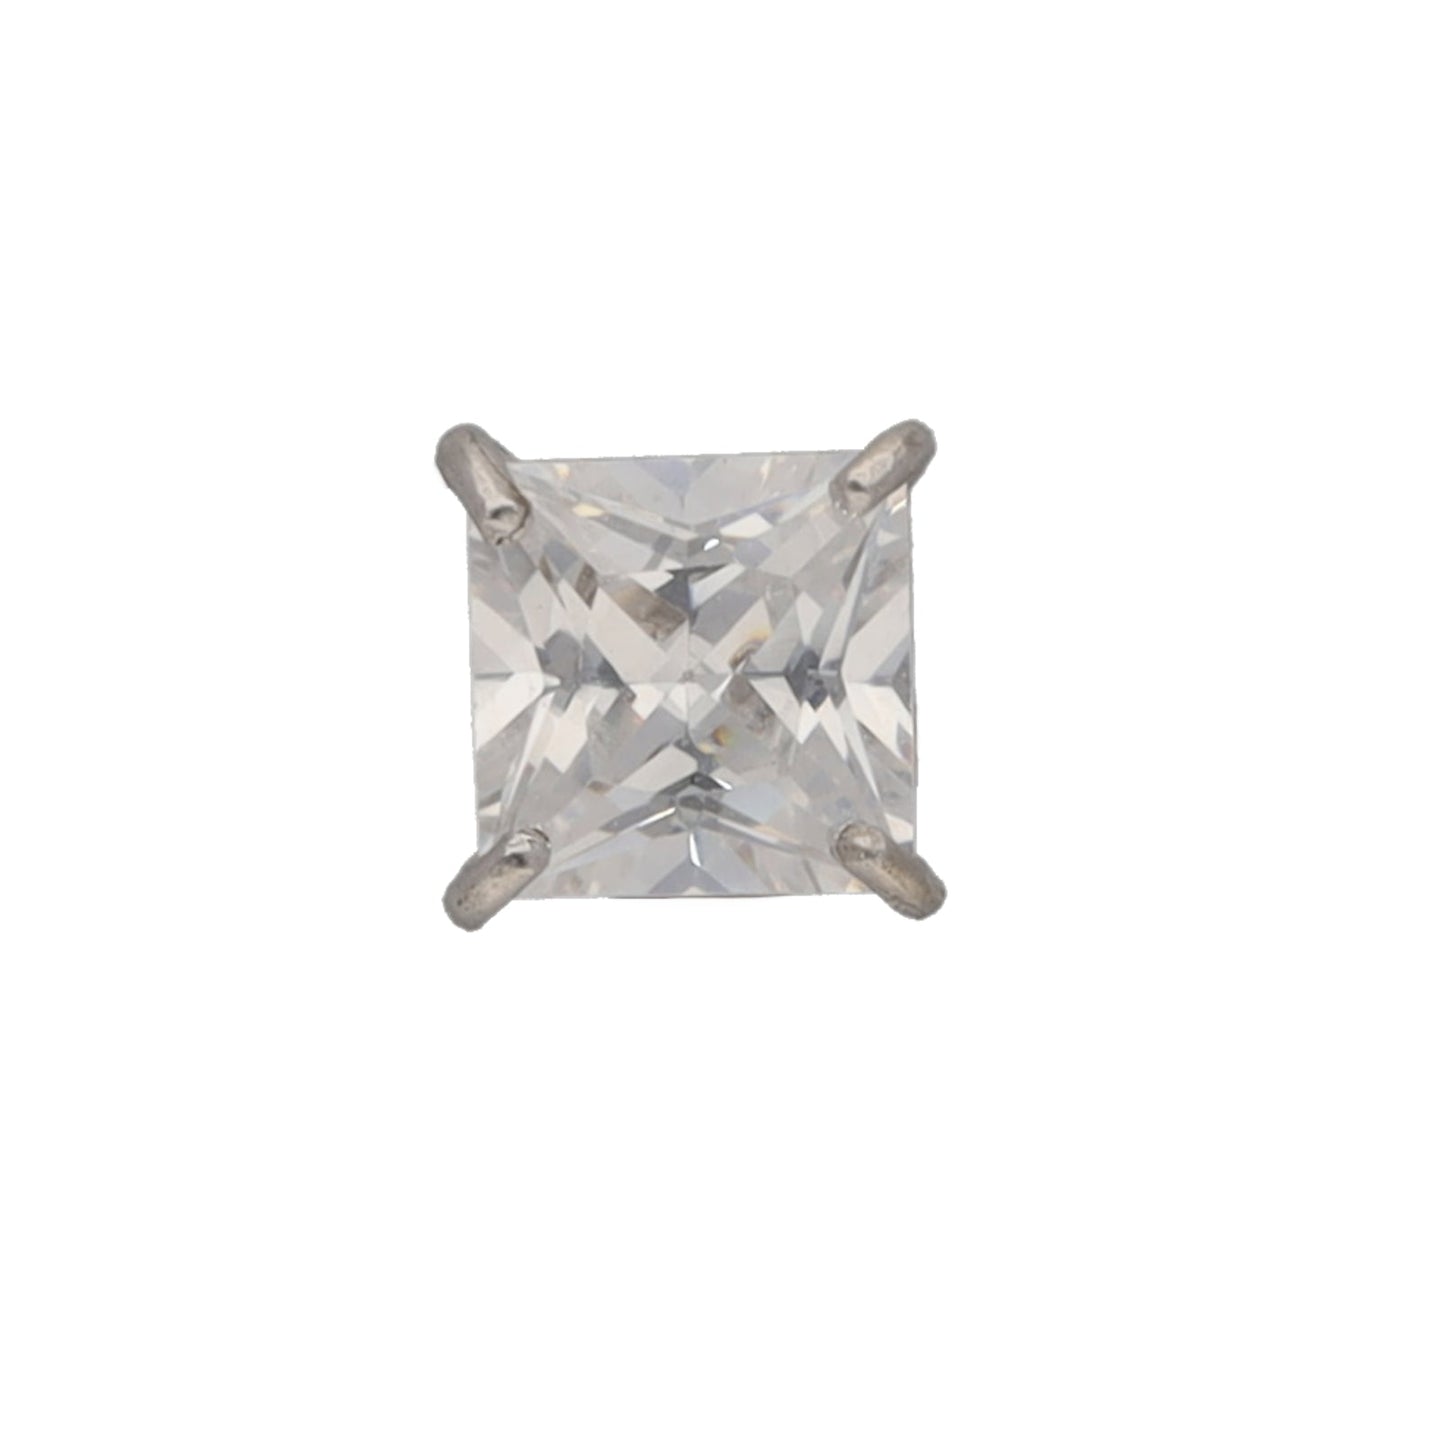 9ct White Gold Cubic Zirconia Square Stud Earring